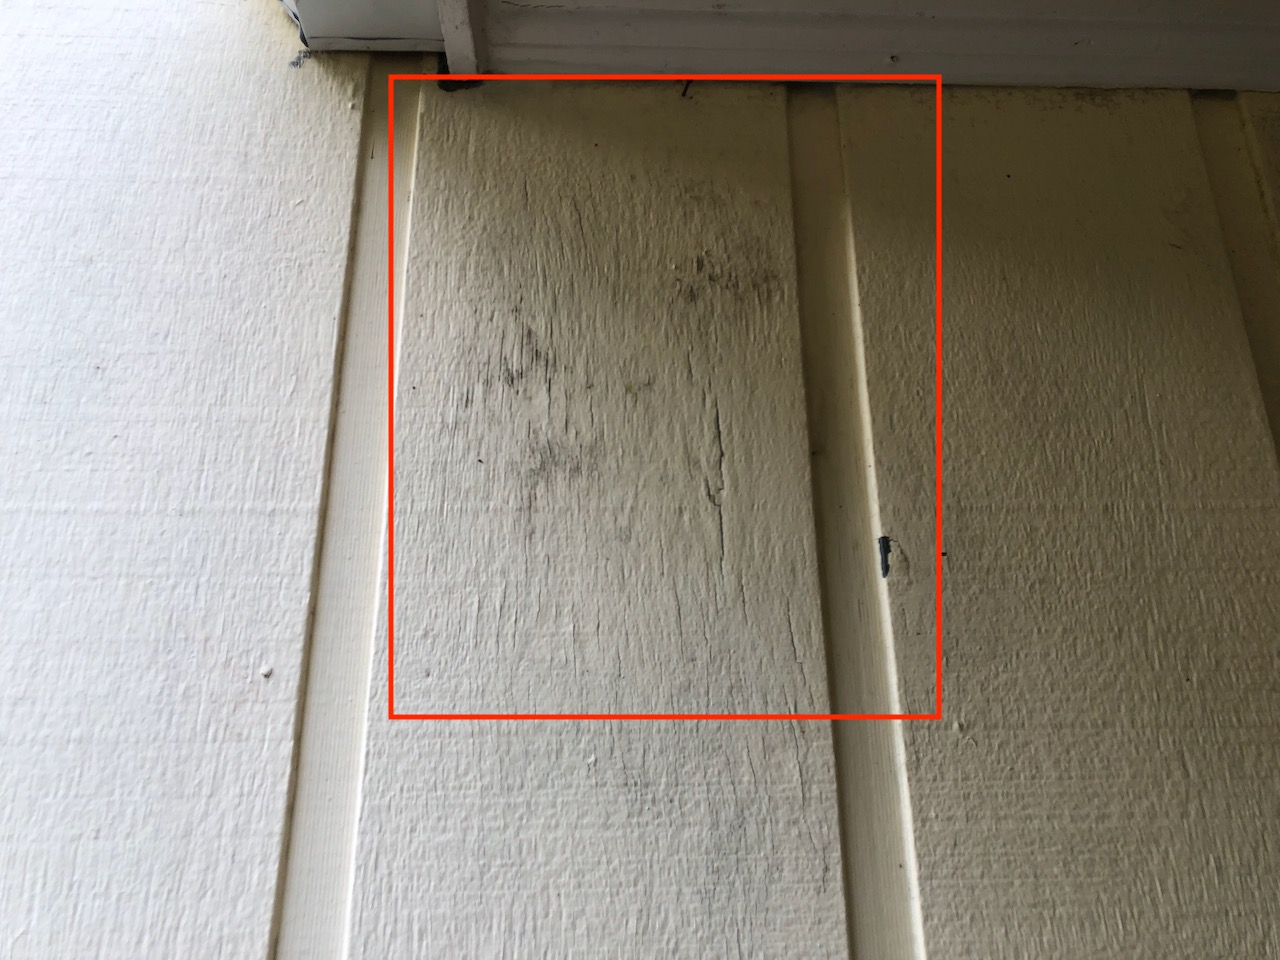 Uninsulated ducts damage your siding in a humid climate in some cases 